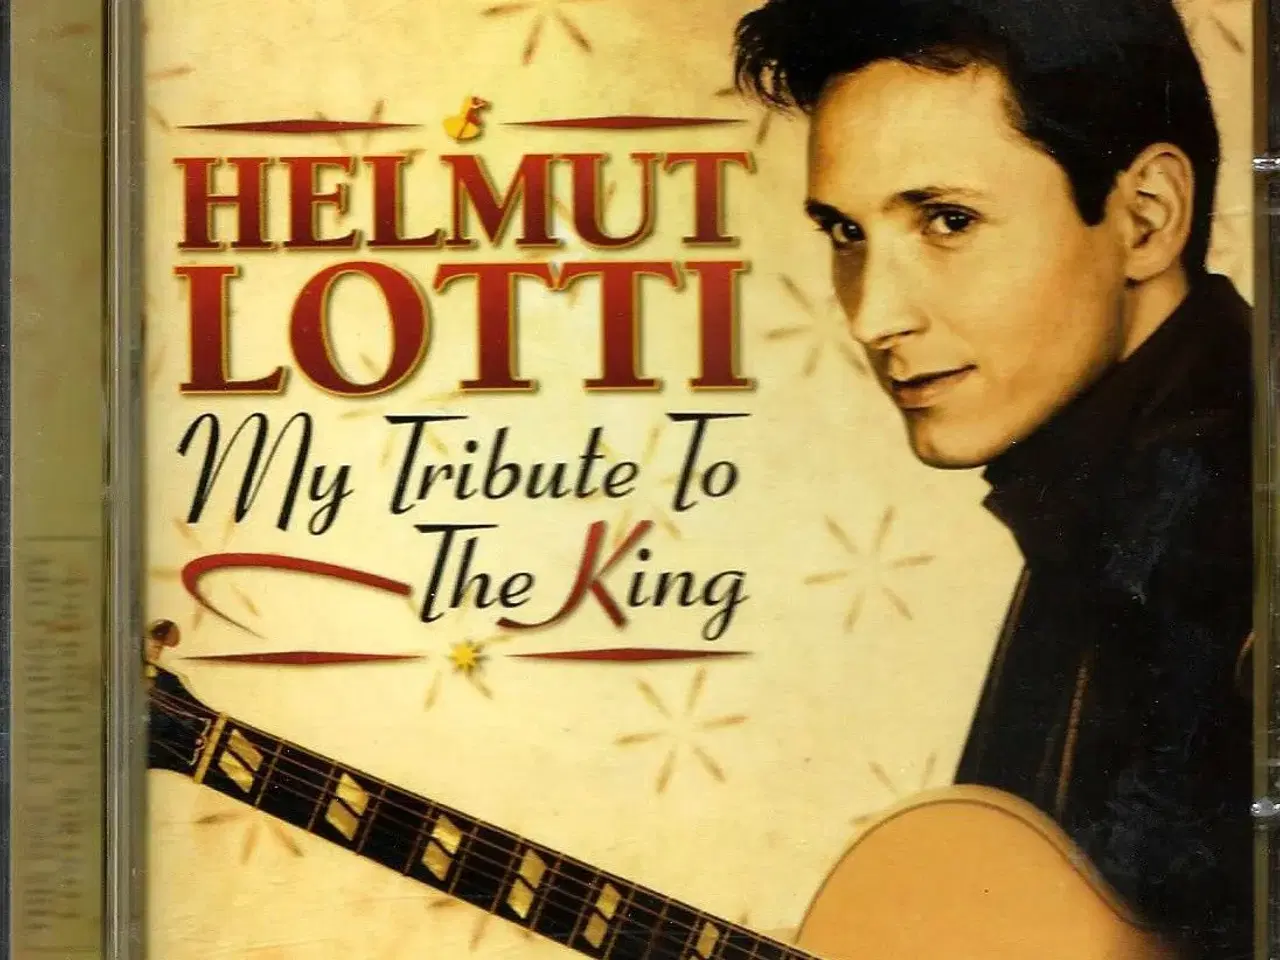 Billede 1 - Helmut Lotti - My Tributo To The King